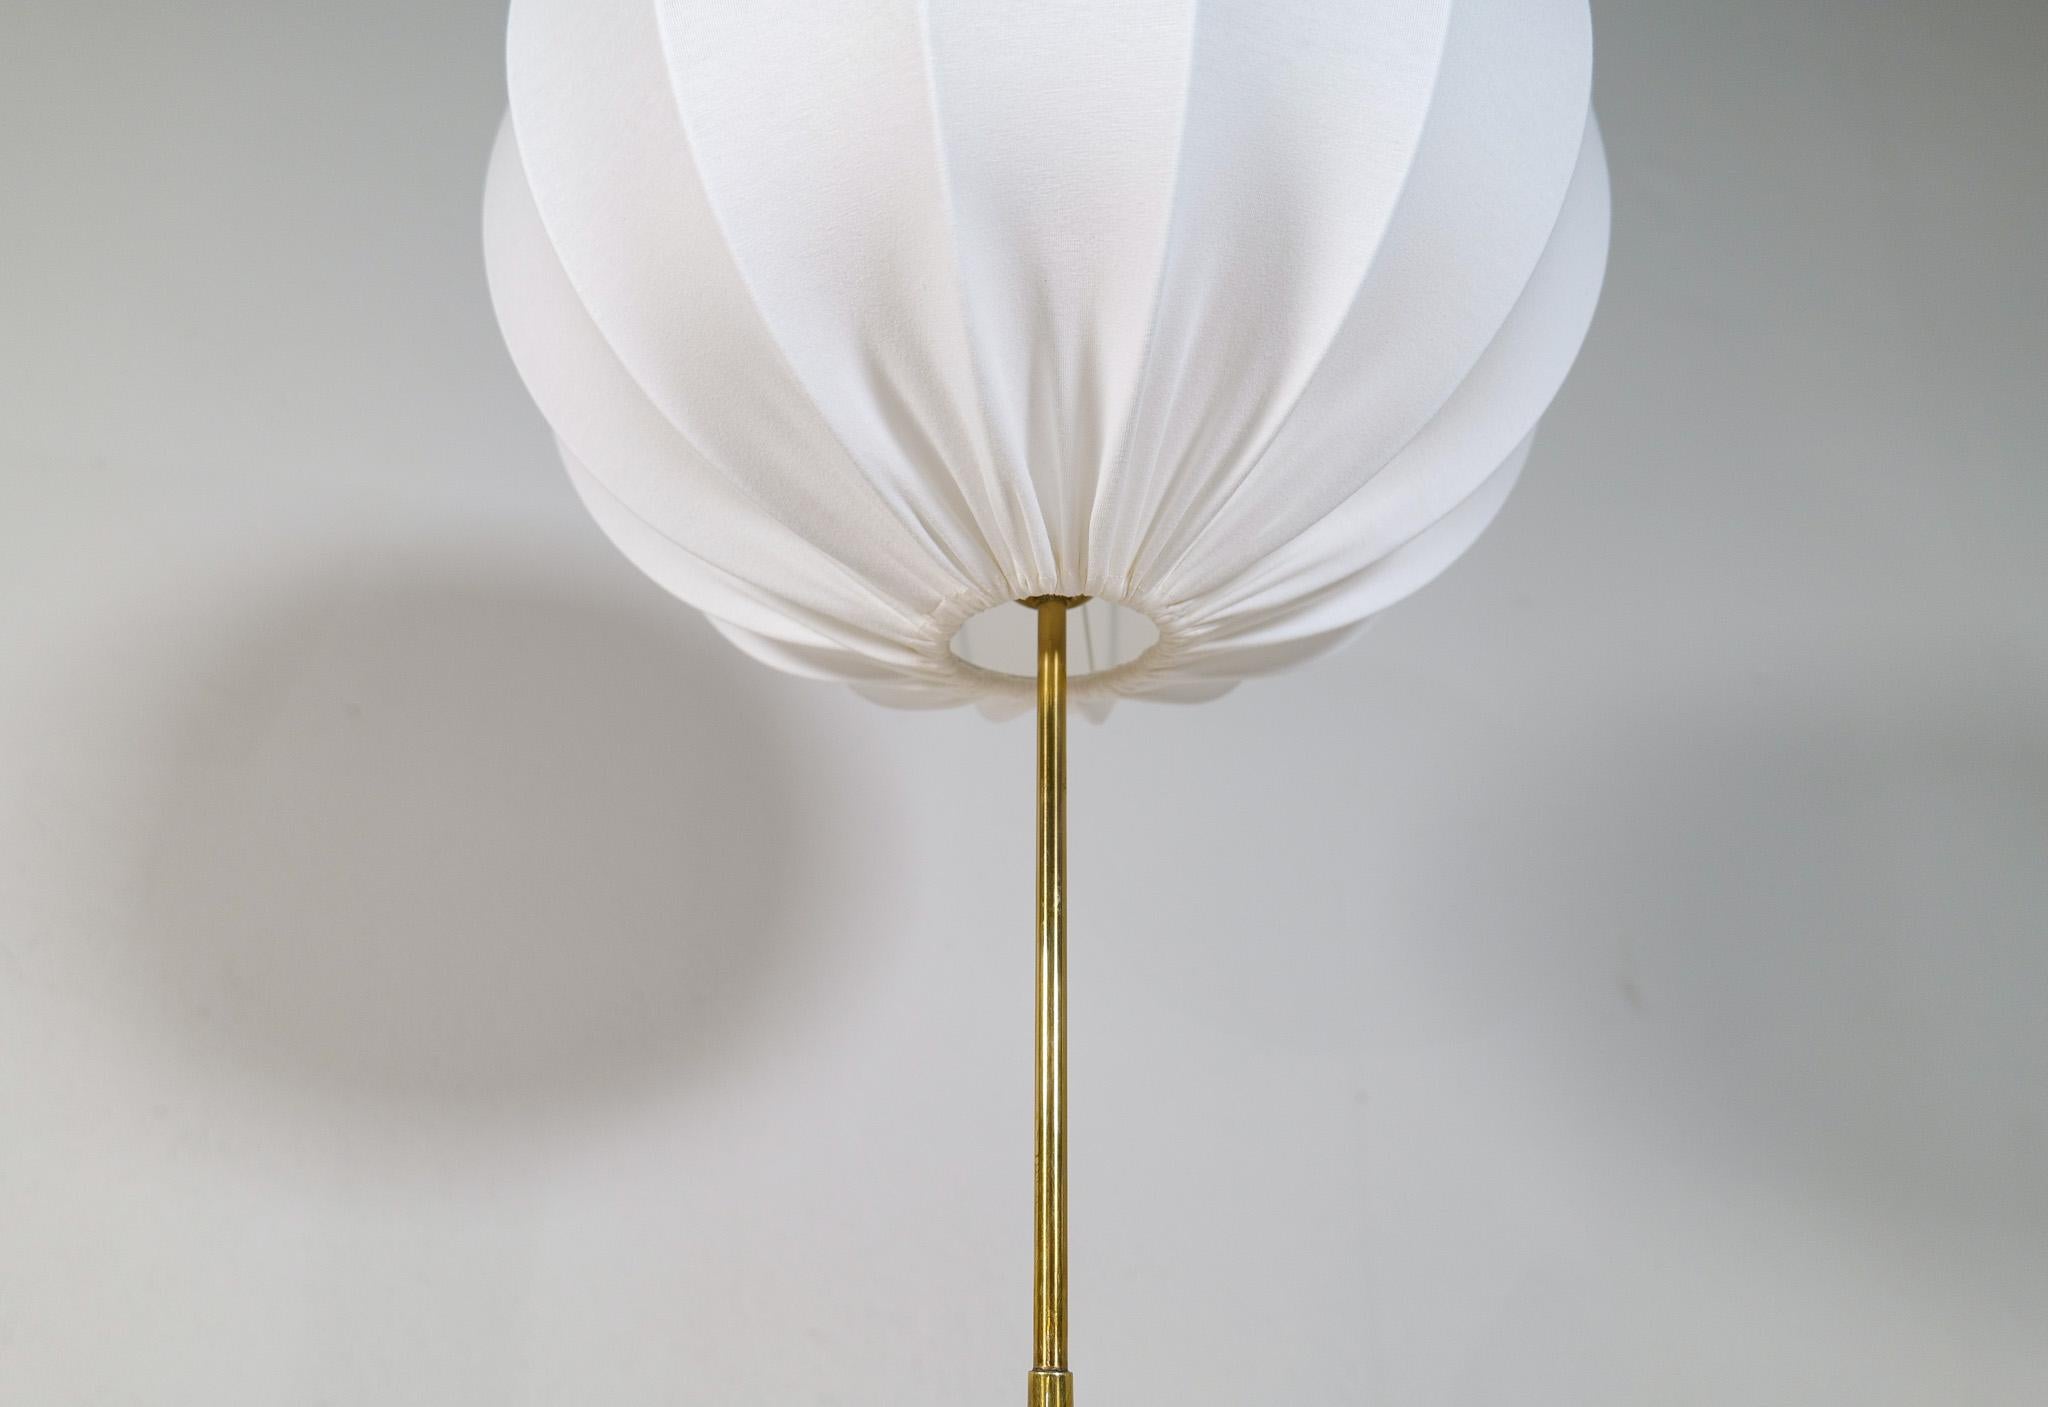 Midcentury Modern ASEA Brass Floor Lamp with Round Cotton Shade, Sweden, 1960s For Sale 2